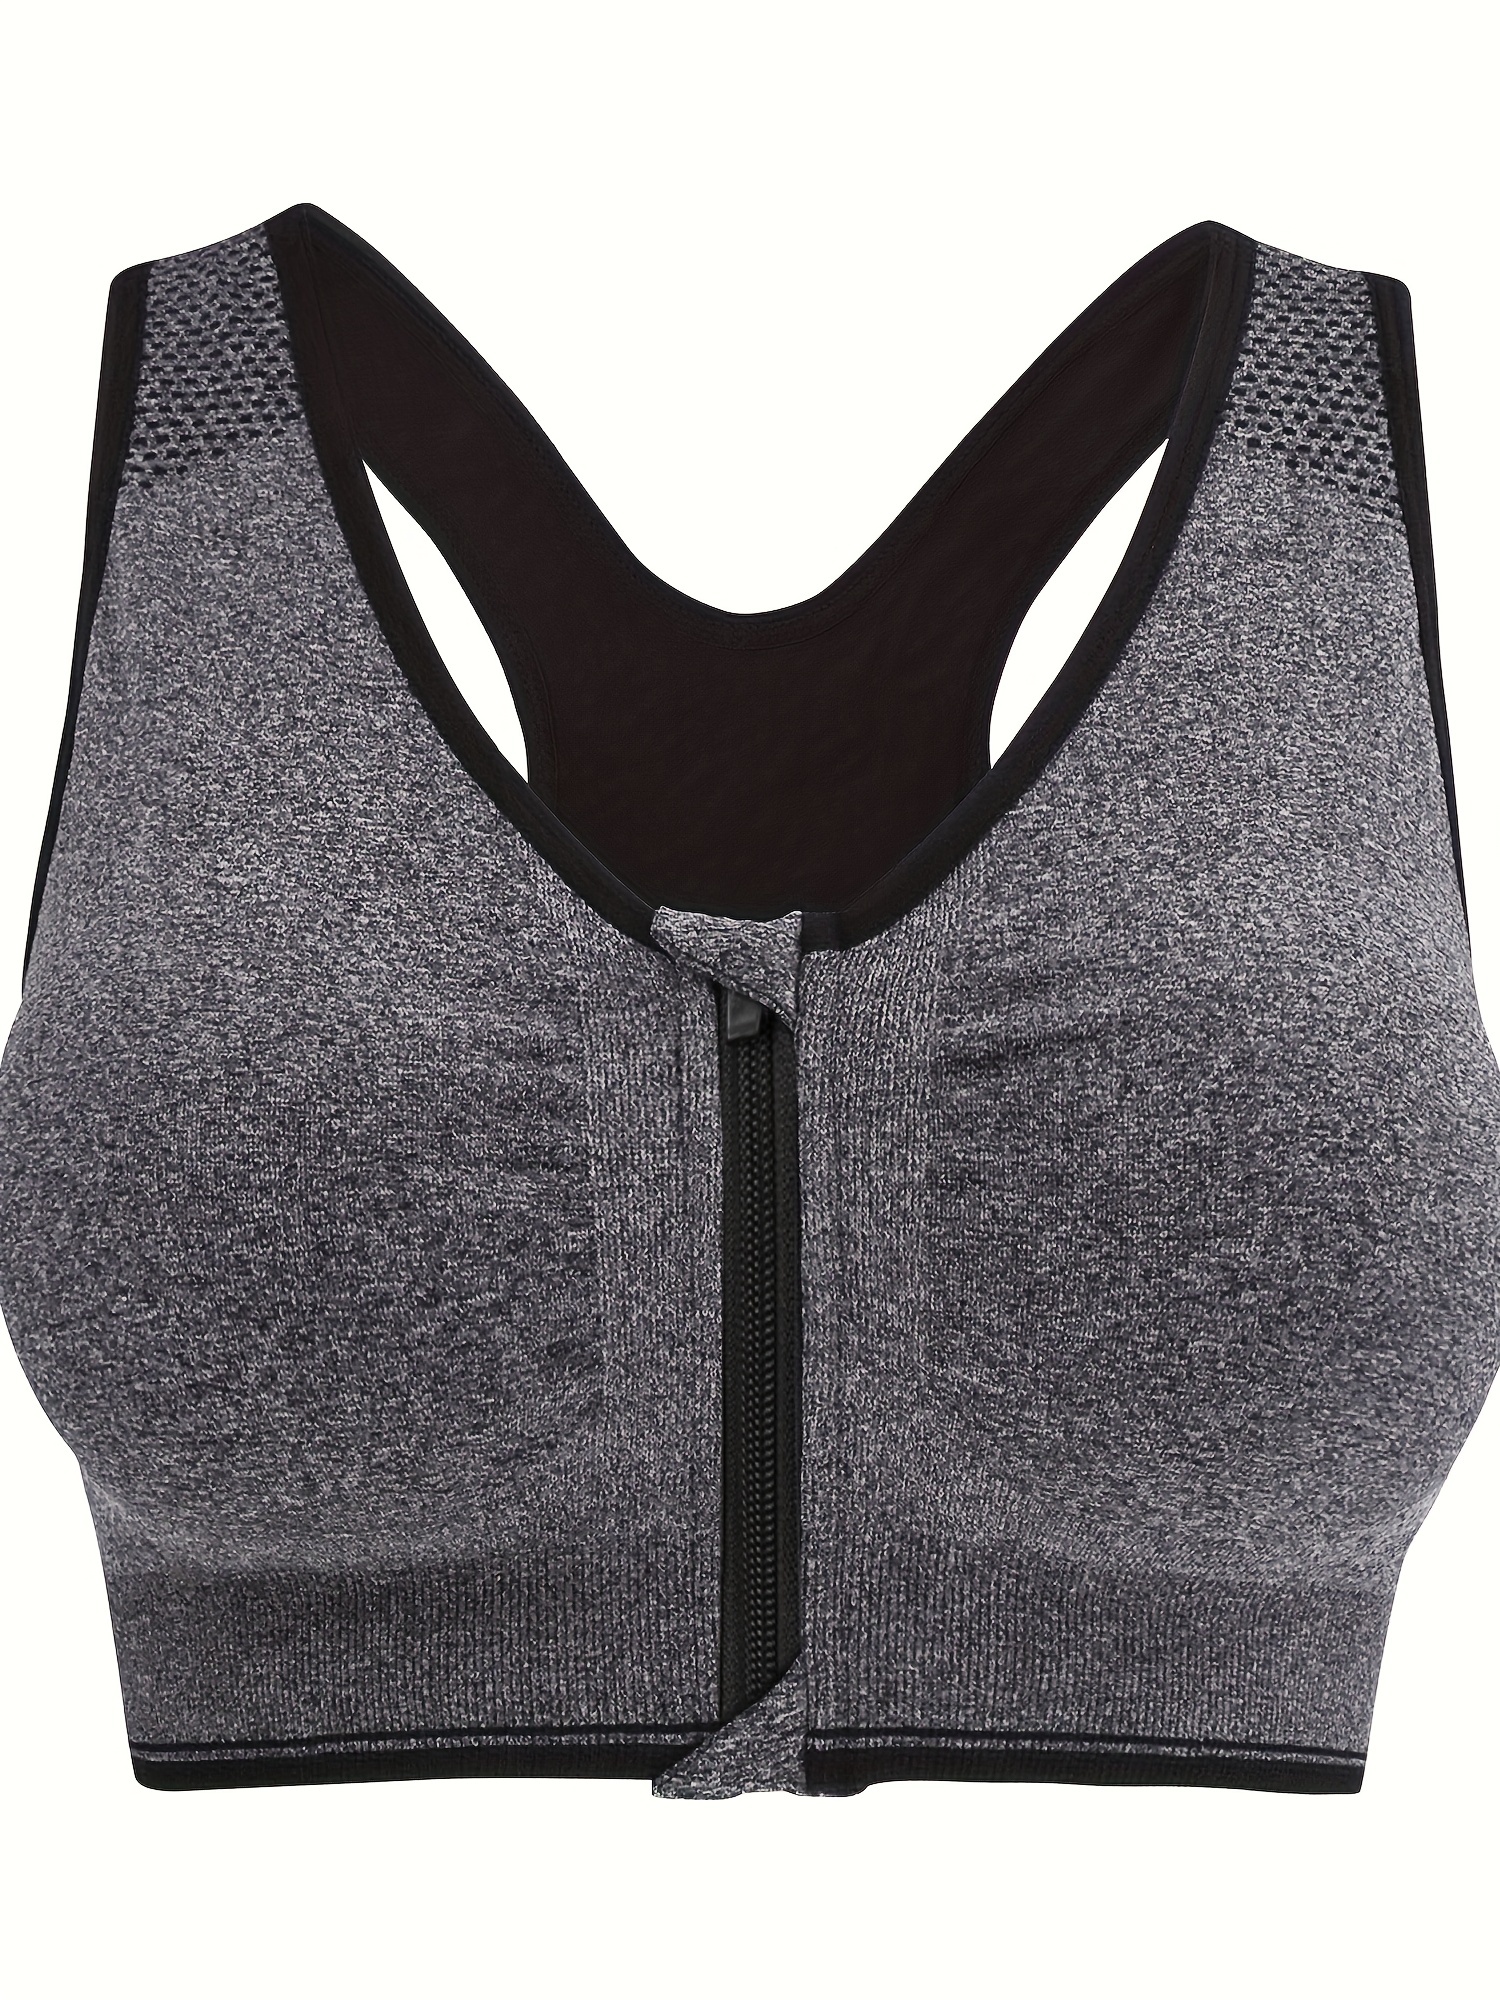 Women's Medium Support Seamless Zip-Front Sports Bra - All in Motion™  Heathered Gray XL